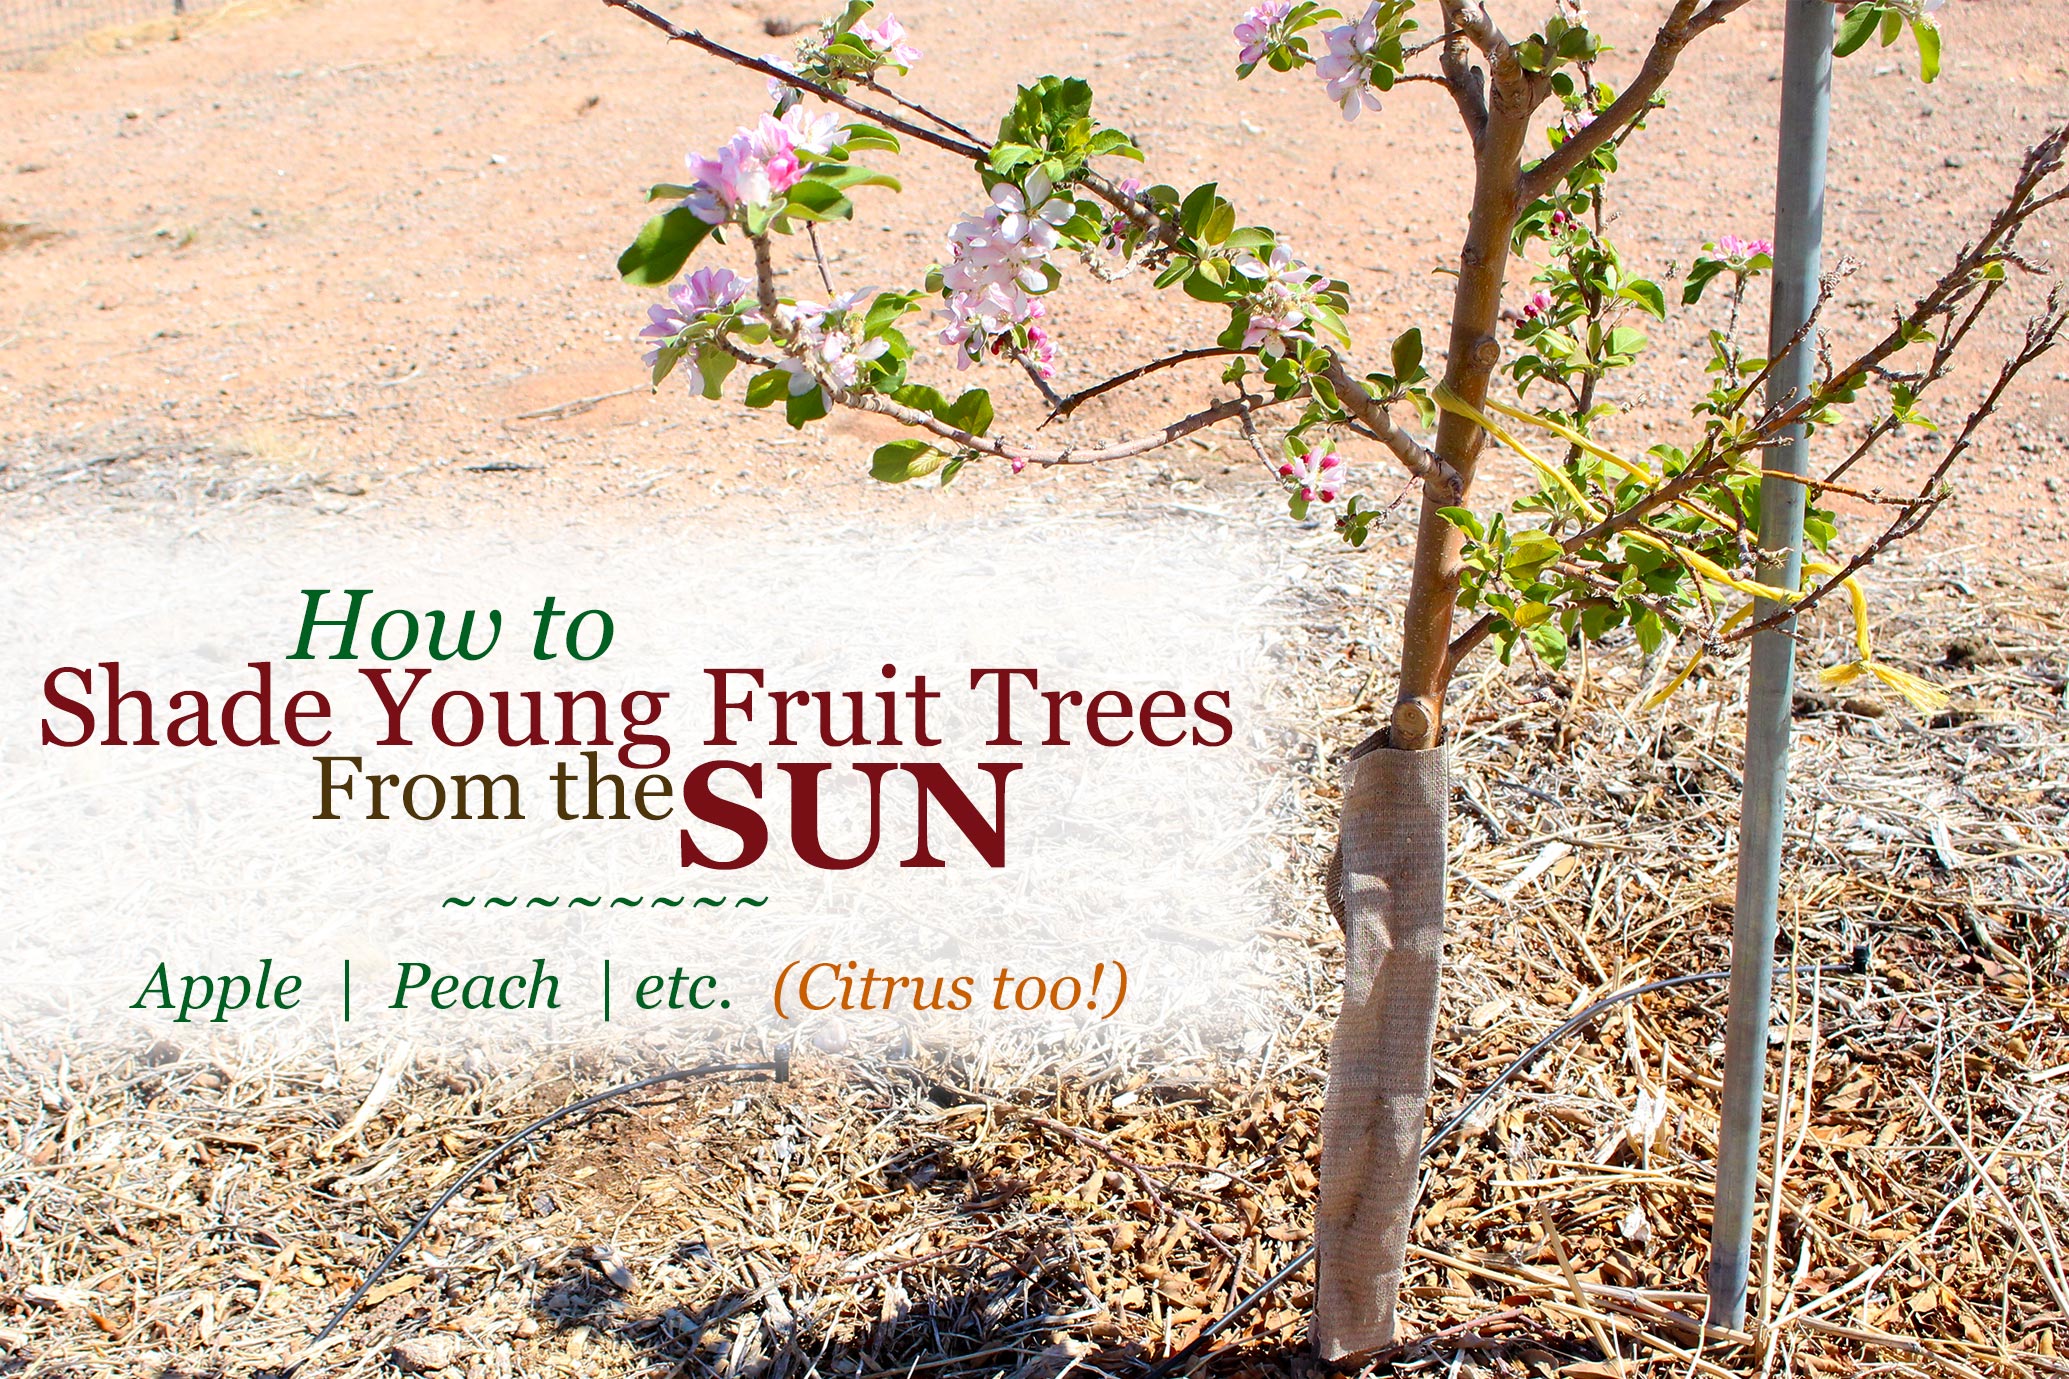 Learn how to protect your young fruit trees from the sun. This is great for both deciduous and citrus fruit trees. Prevent sunburn without the traditionally used chemical paint.